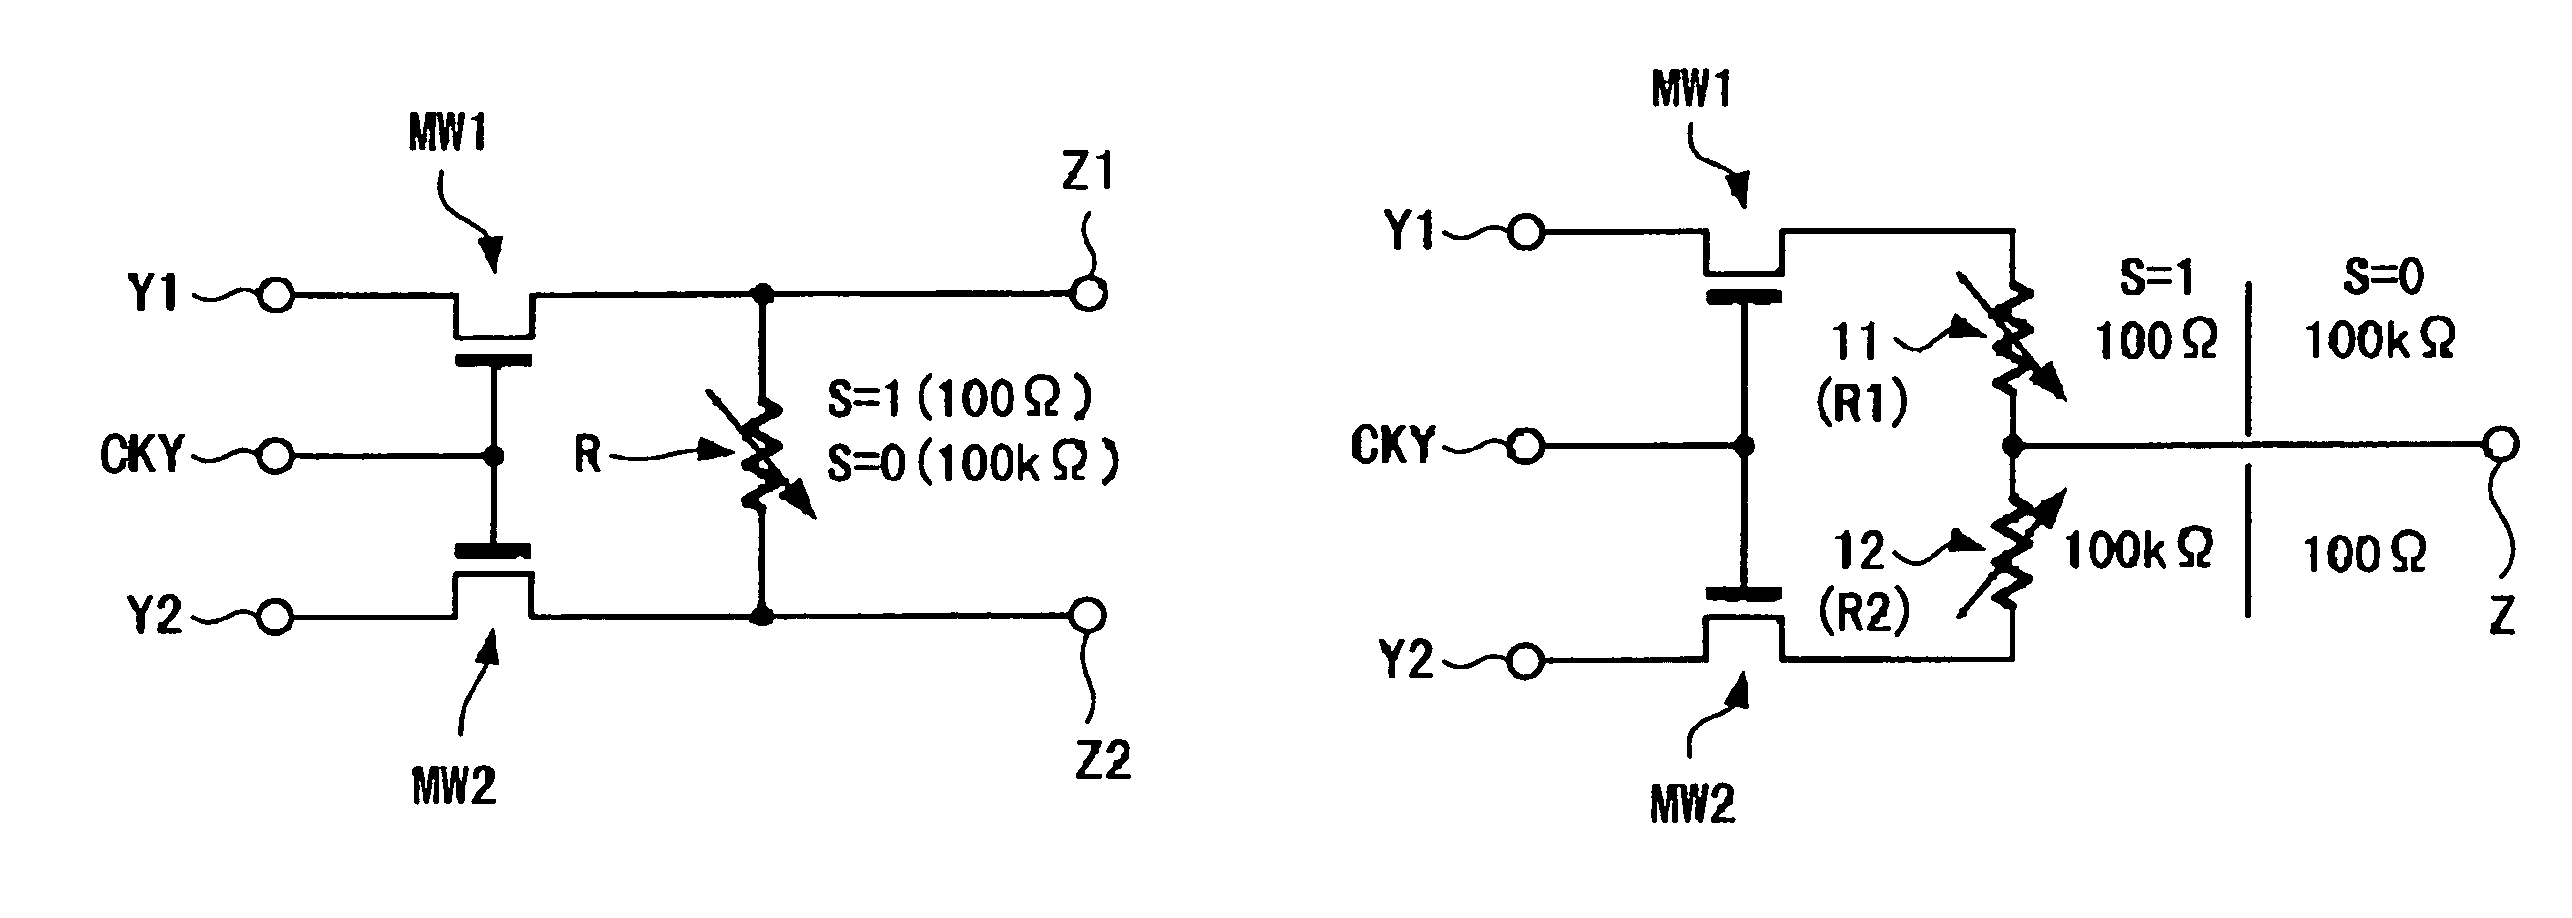 Arithmetic circuit integrated with a variable resistance memory element